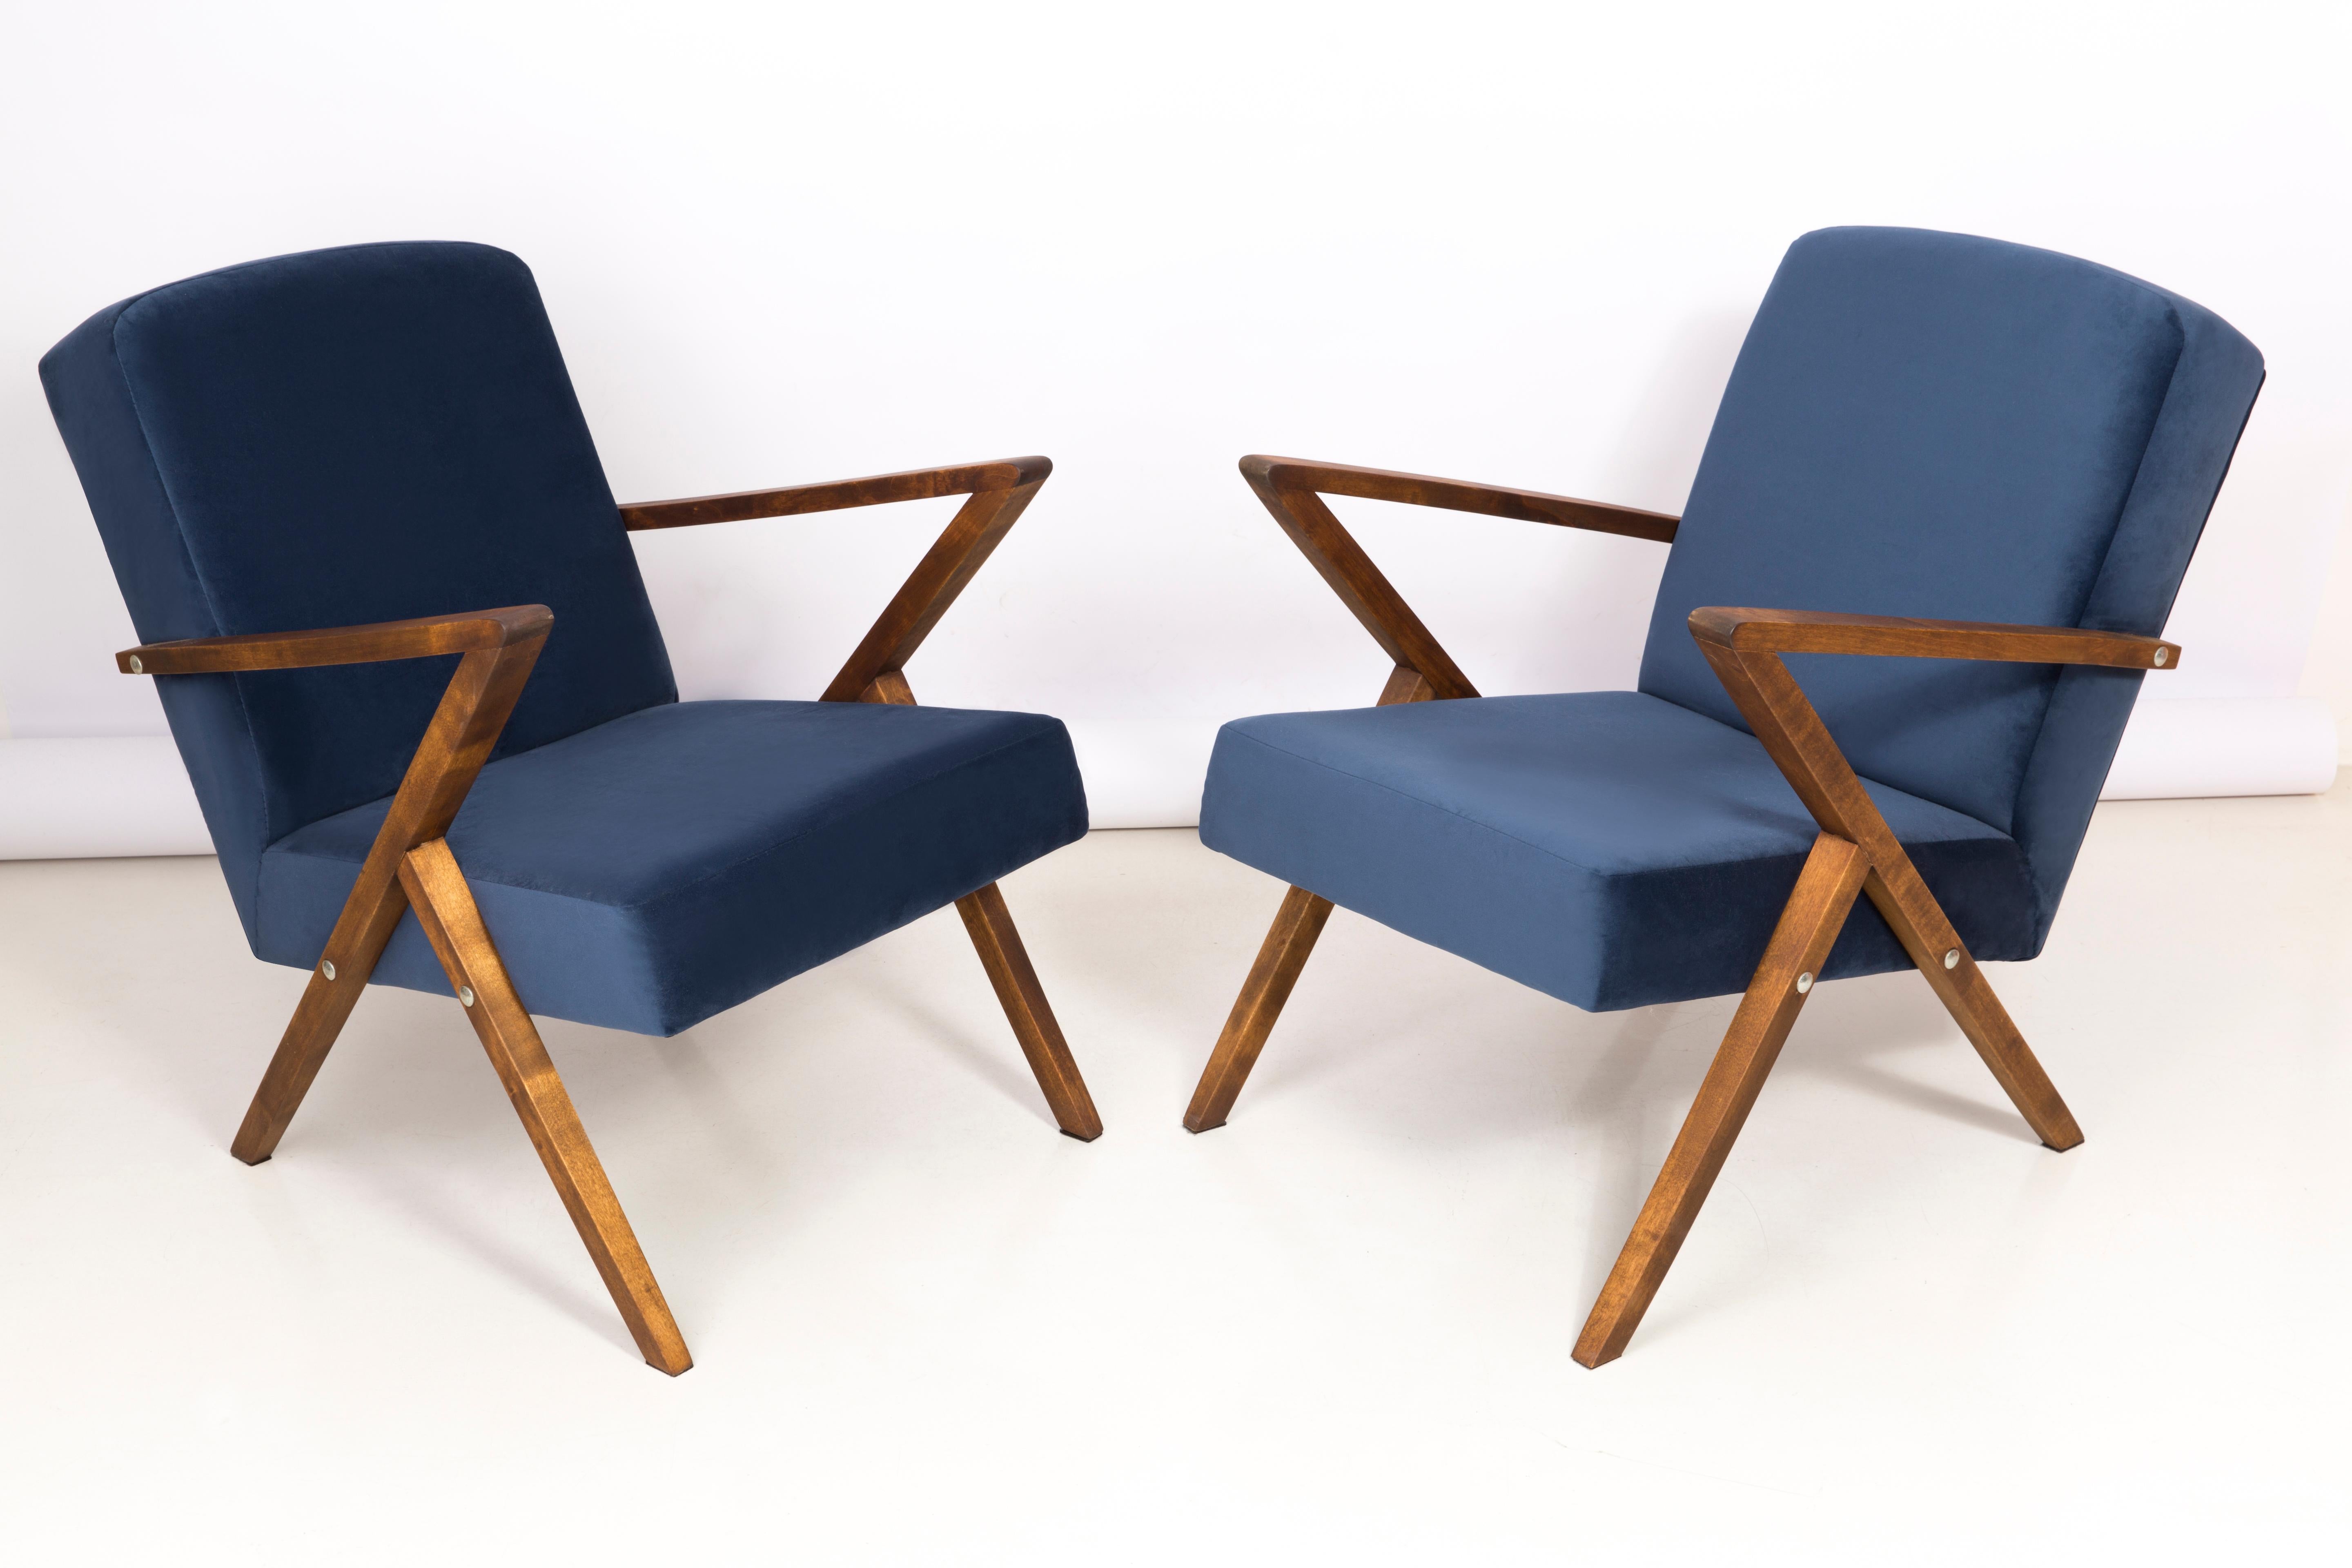 A pair of armchairs manufactured at the Bydgoszcz Renewal Cooperative in the 1970s. The armchairs are after a comprehensive renovation of carpentry and upholstery. The wood has been cleaned, cavities completed, painted with dark walnut stain,